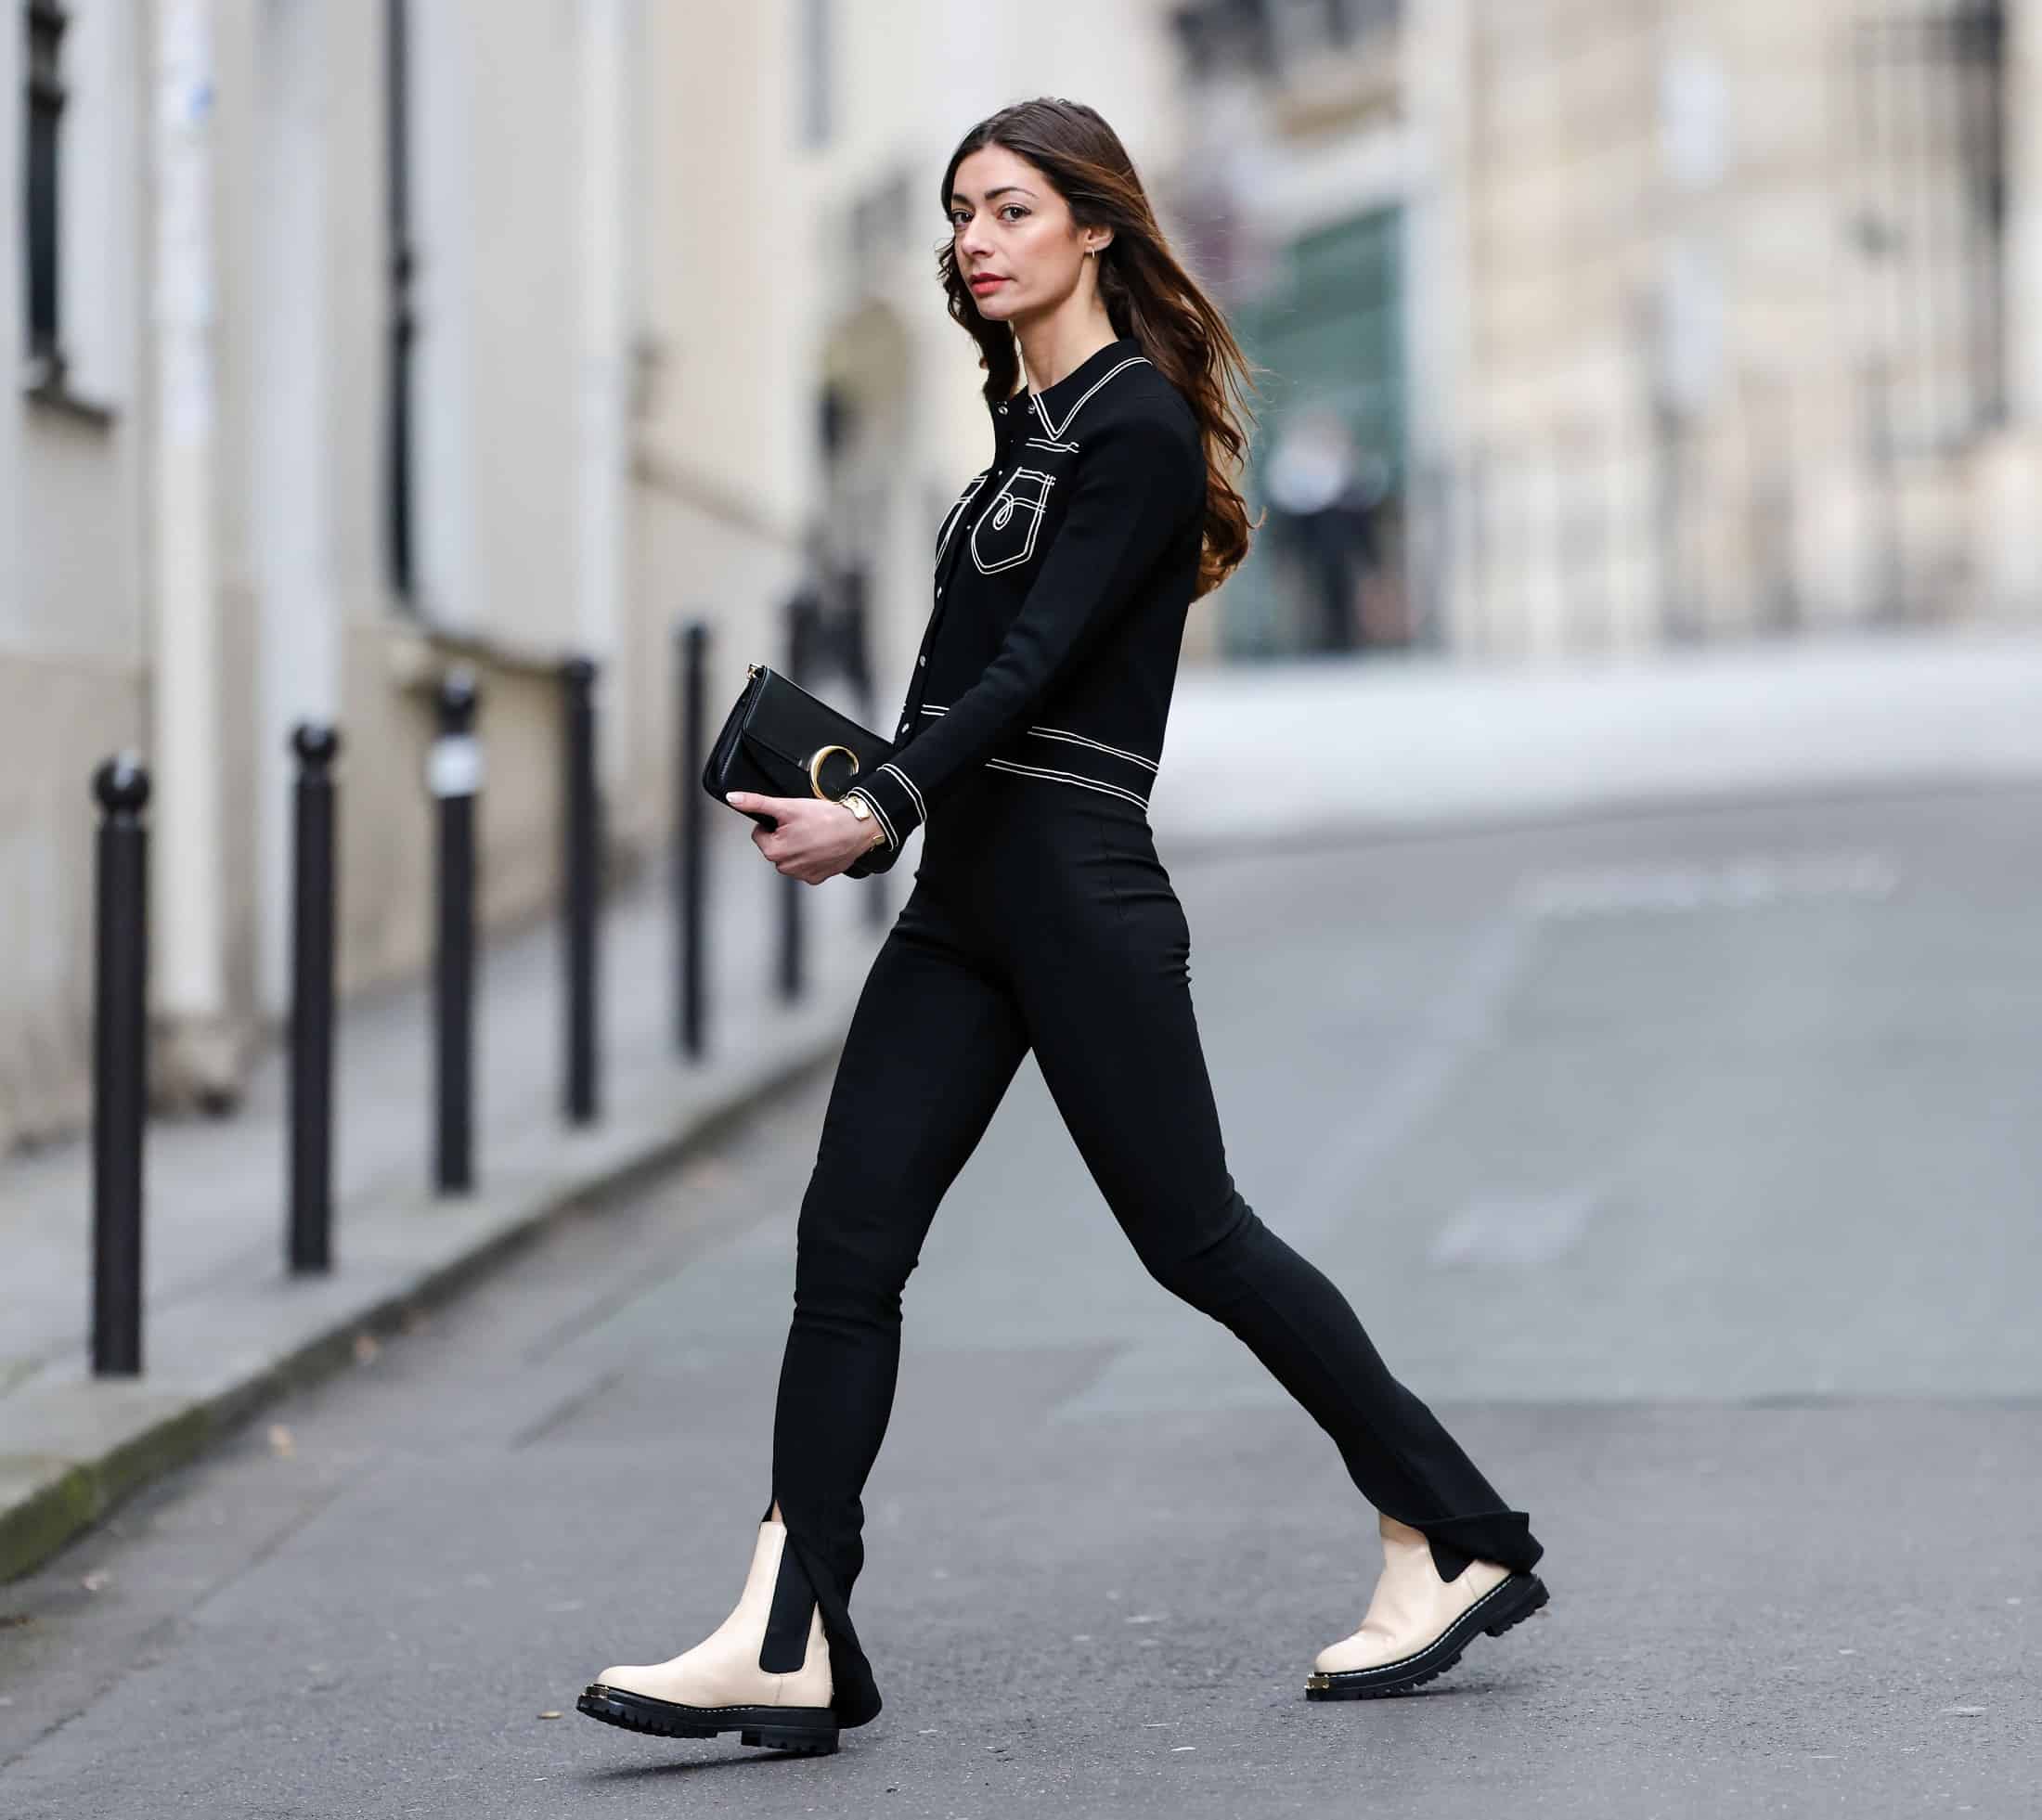 The slit leg is a microtrend that has taken over the trouser world this spring